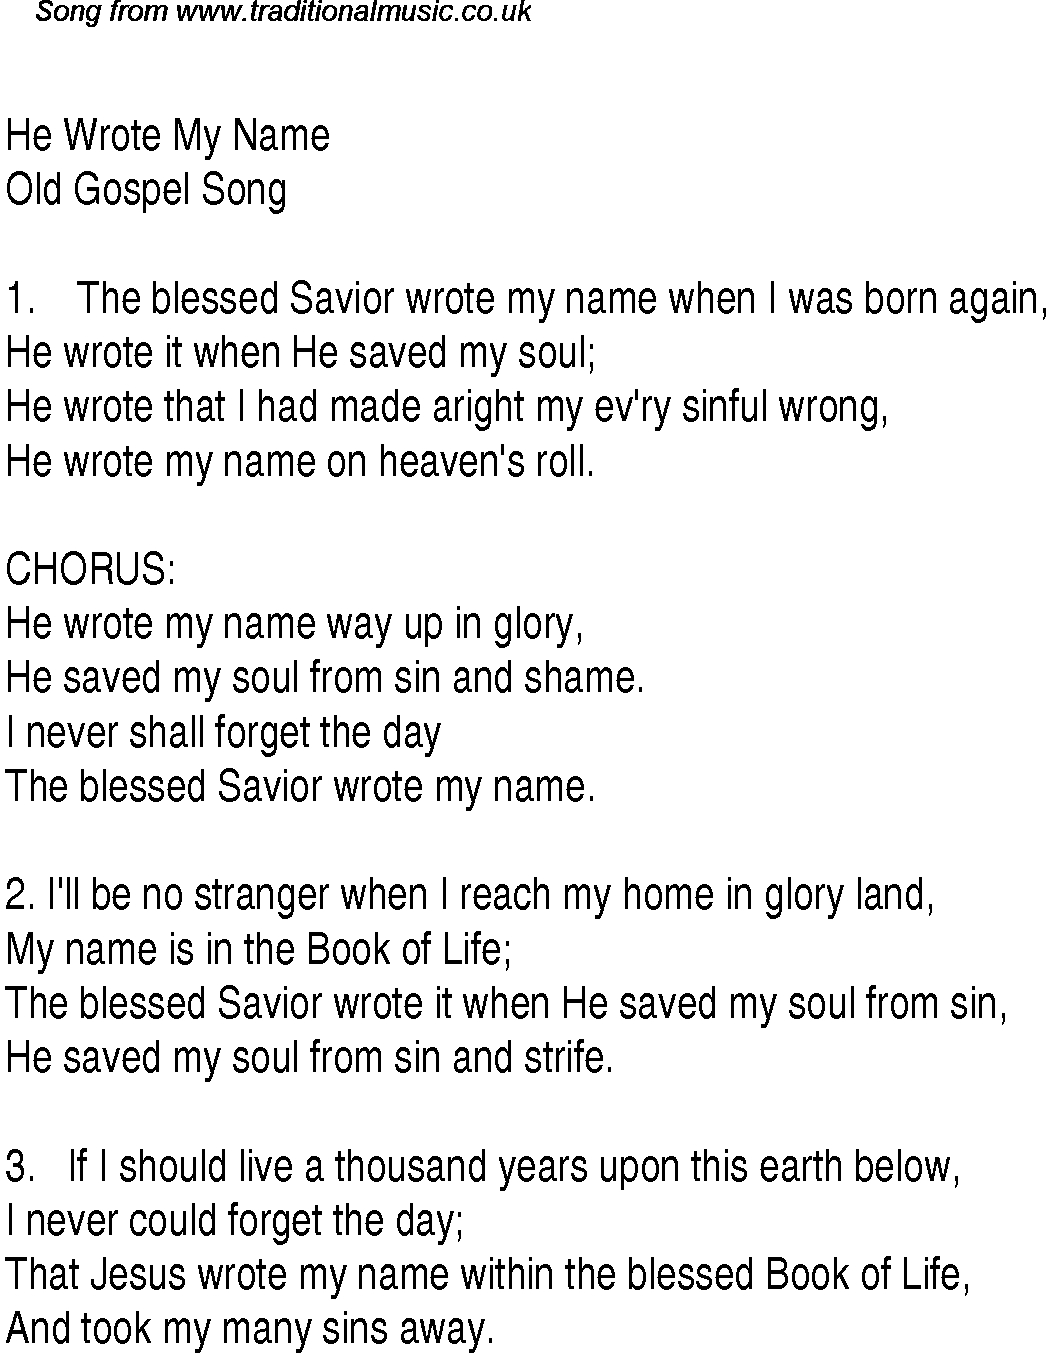 Blessed Be Your Name Chords He Wrote My Name Christian Gospel Song Lyrics And Chords